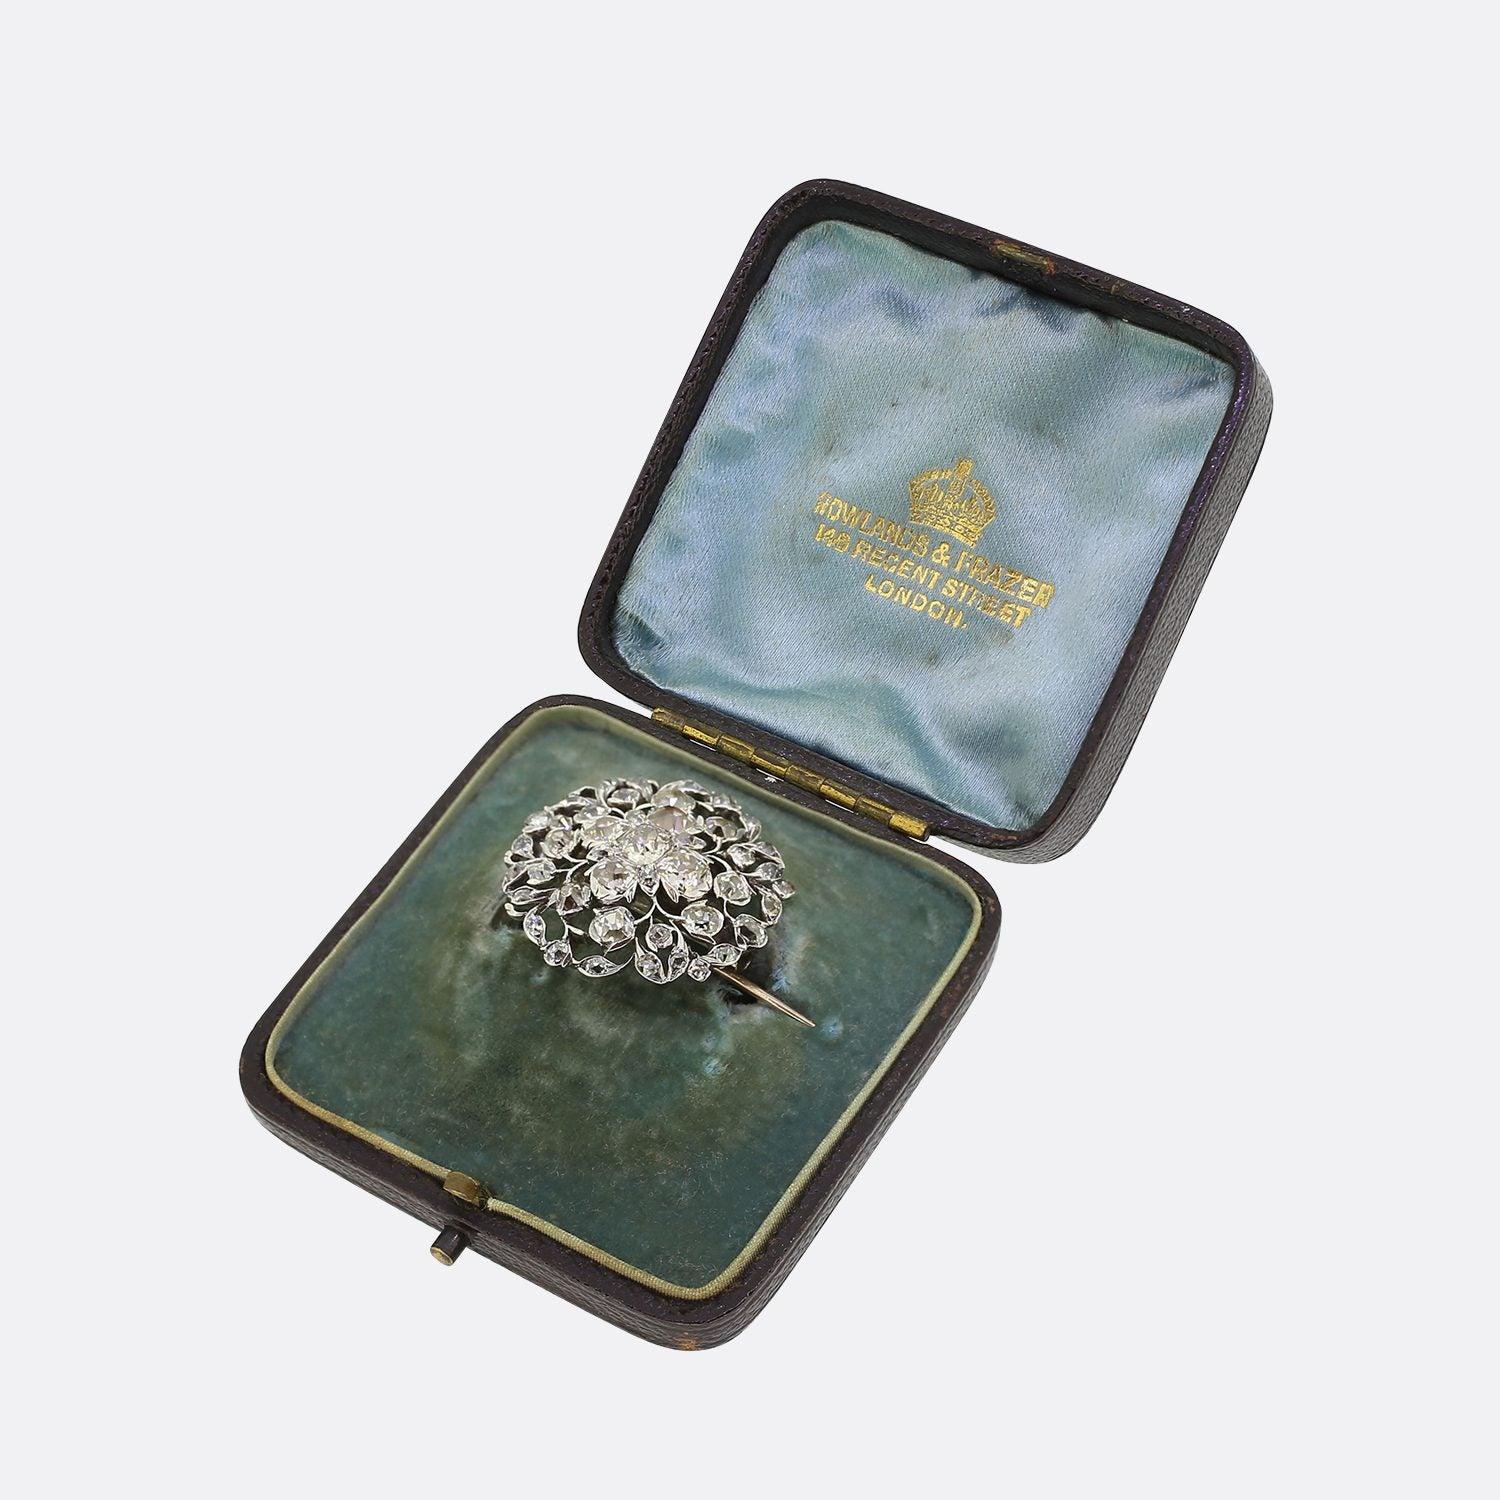 This is a wonderful and rare diamond brooch from the mid Georgian era. The diamonds are set in silver and the brooch has been wonderfully handcrafted in a floral style. All of the diamonds are chunky old cuts and are well matched for colour and